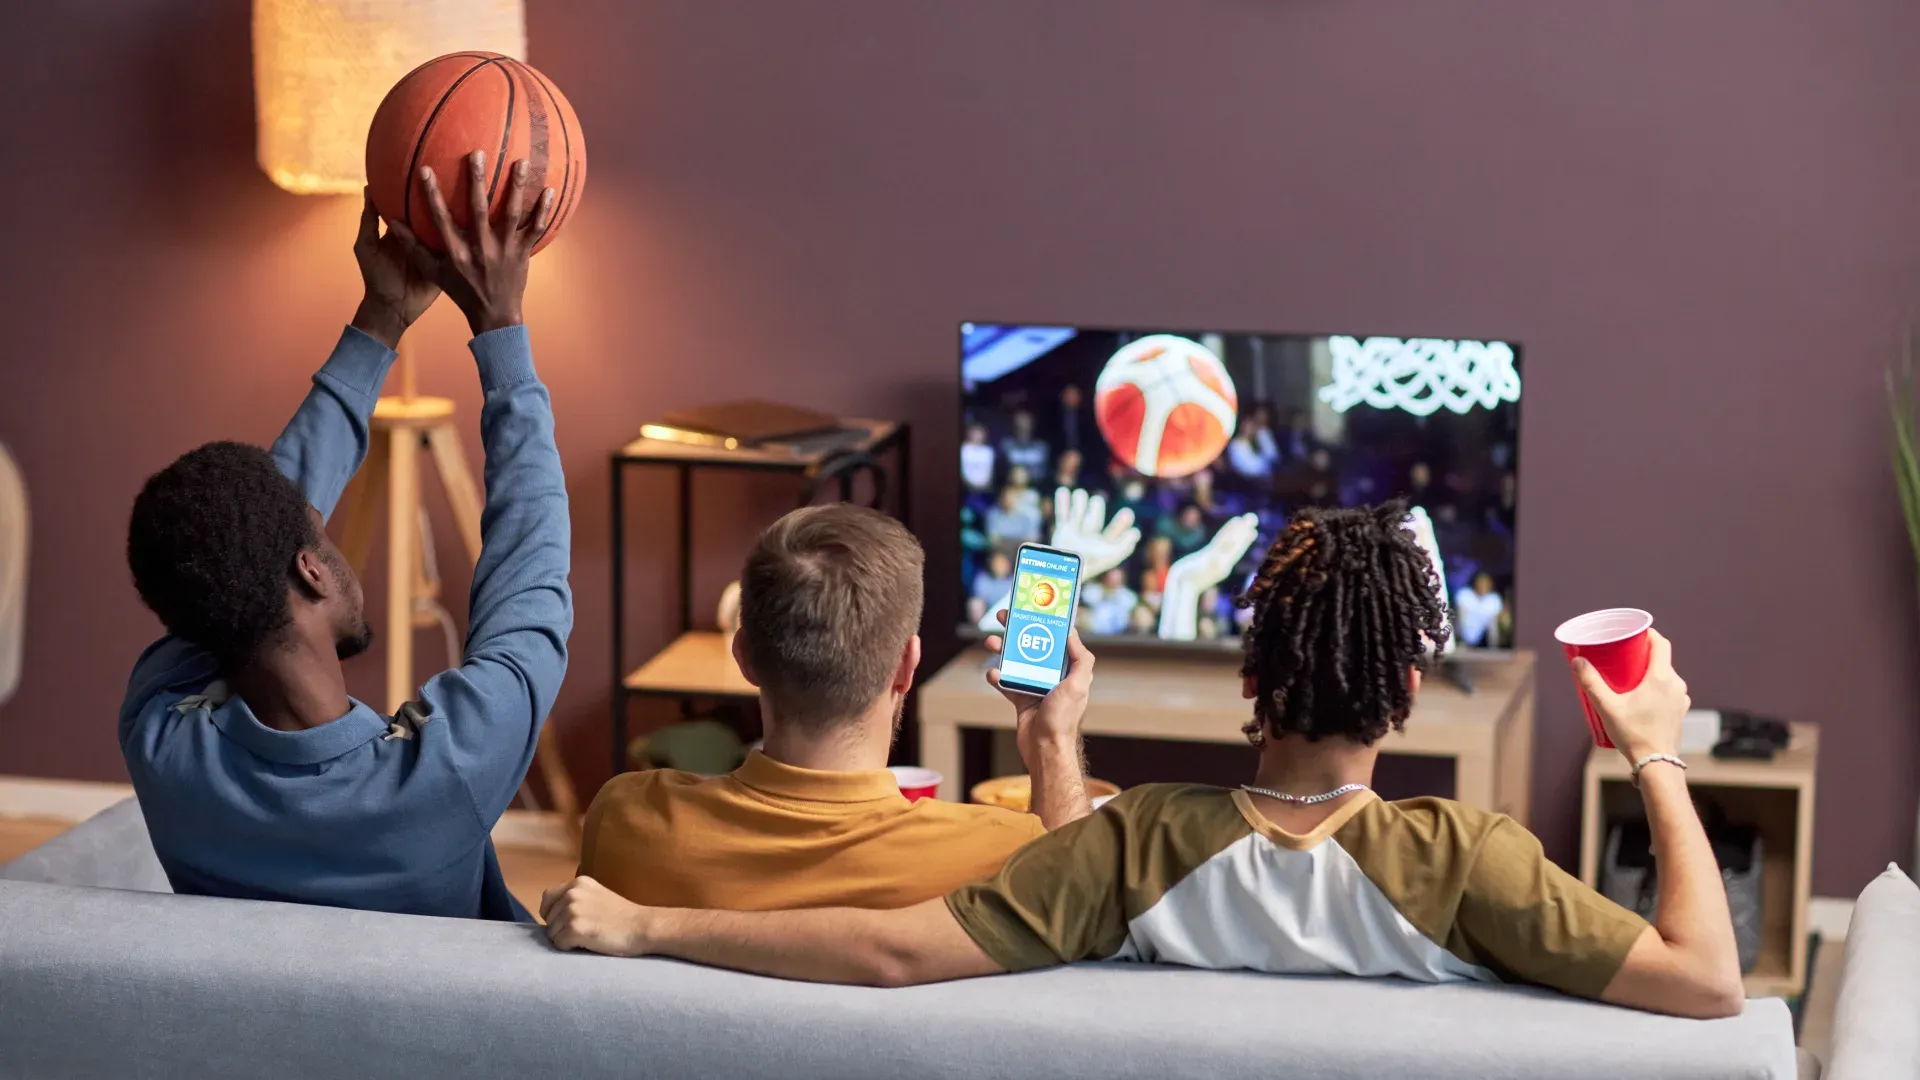 How To Watch Superbowl On Samsung Smart TV